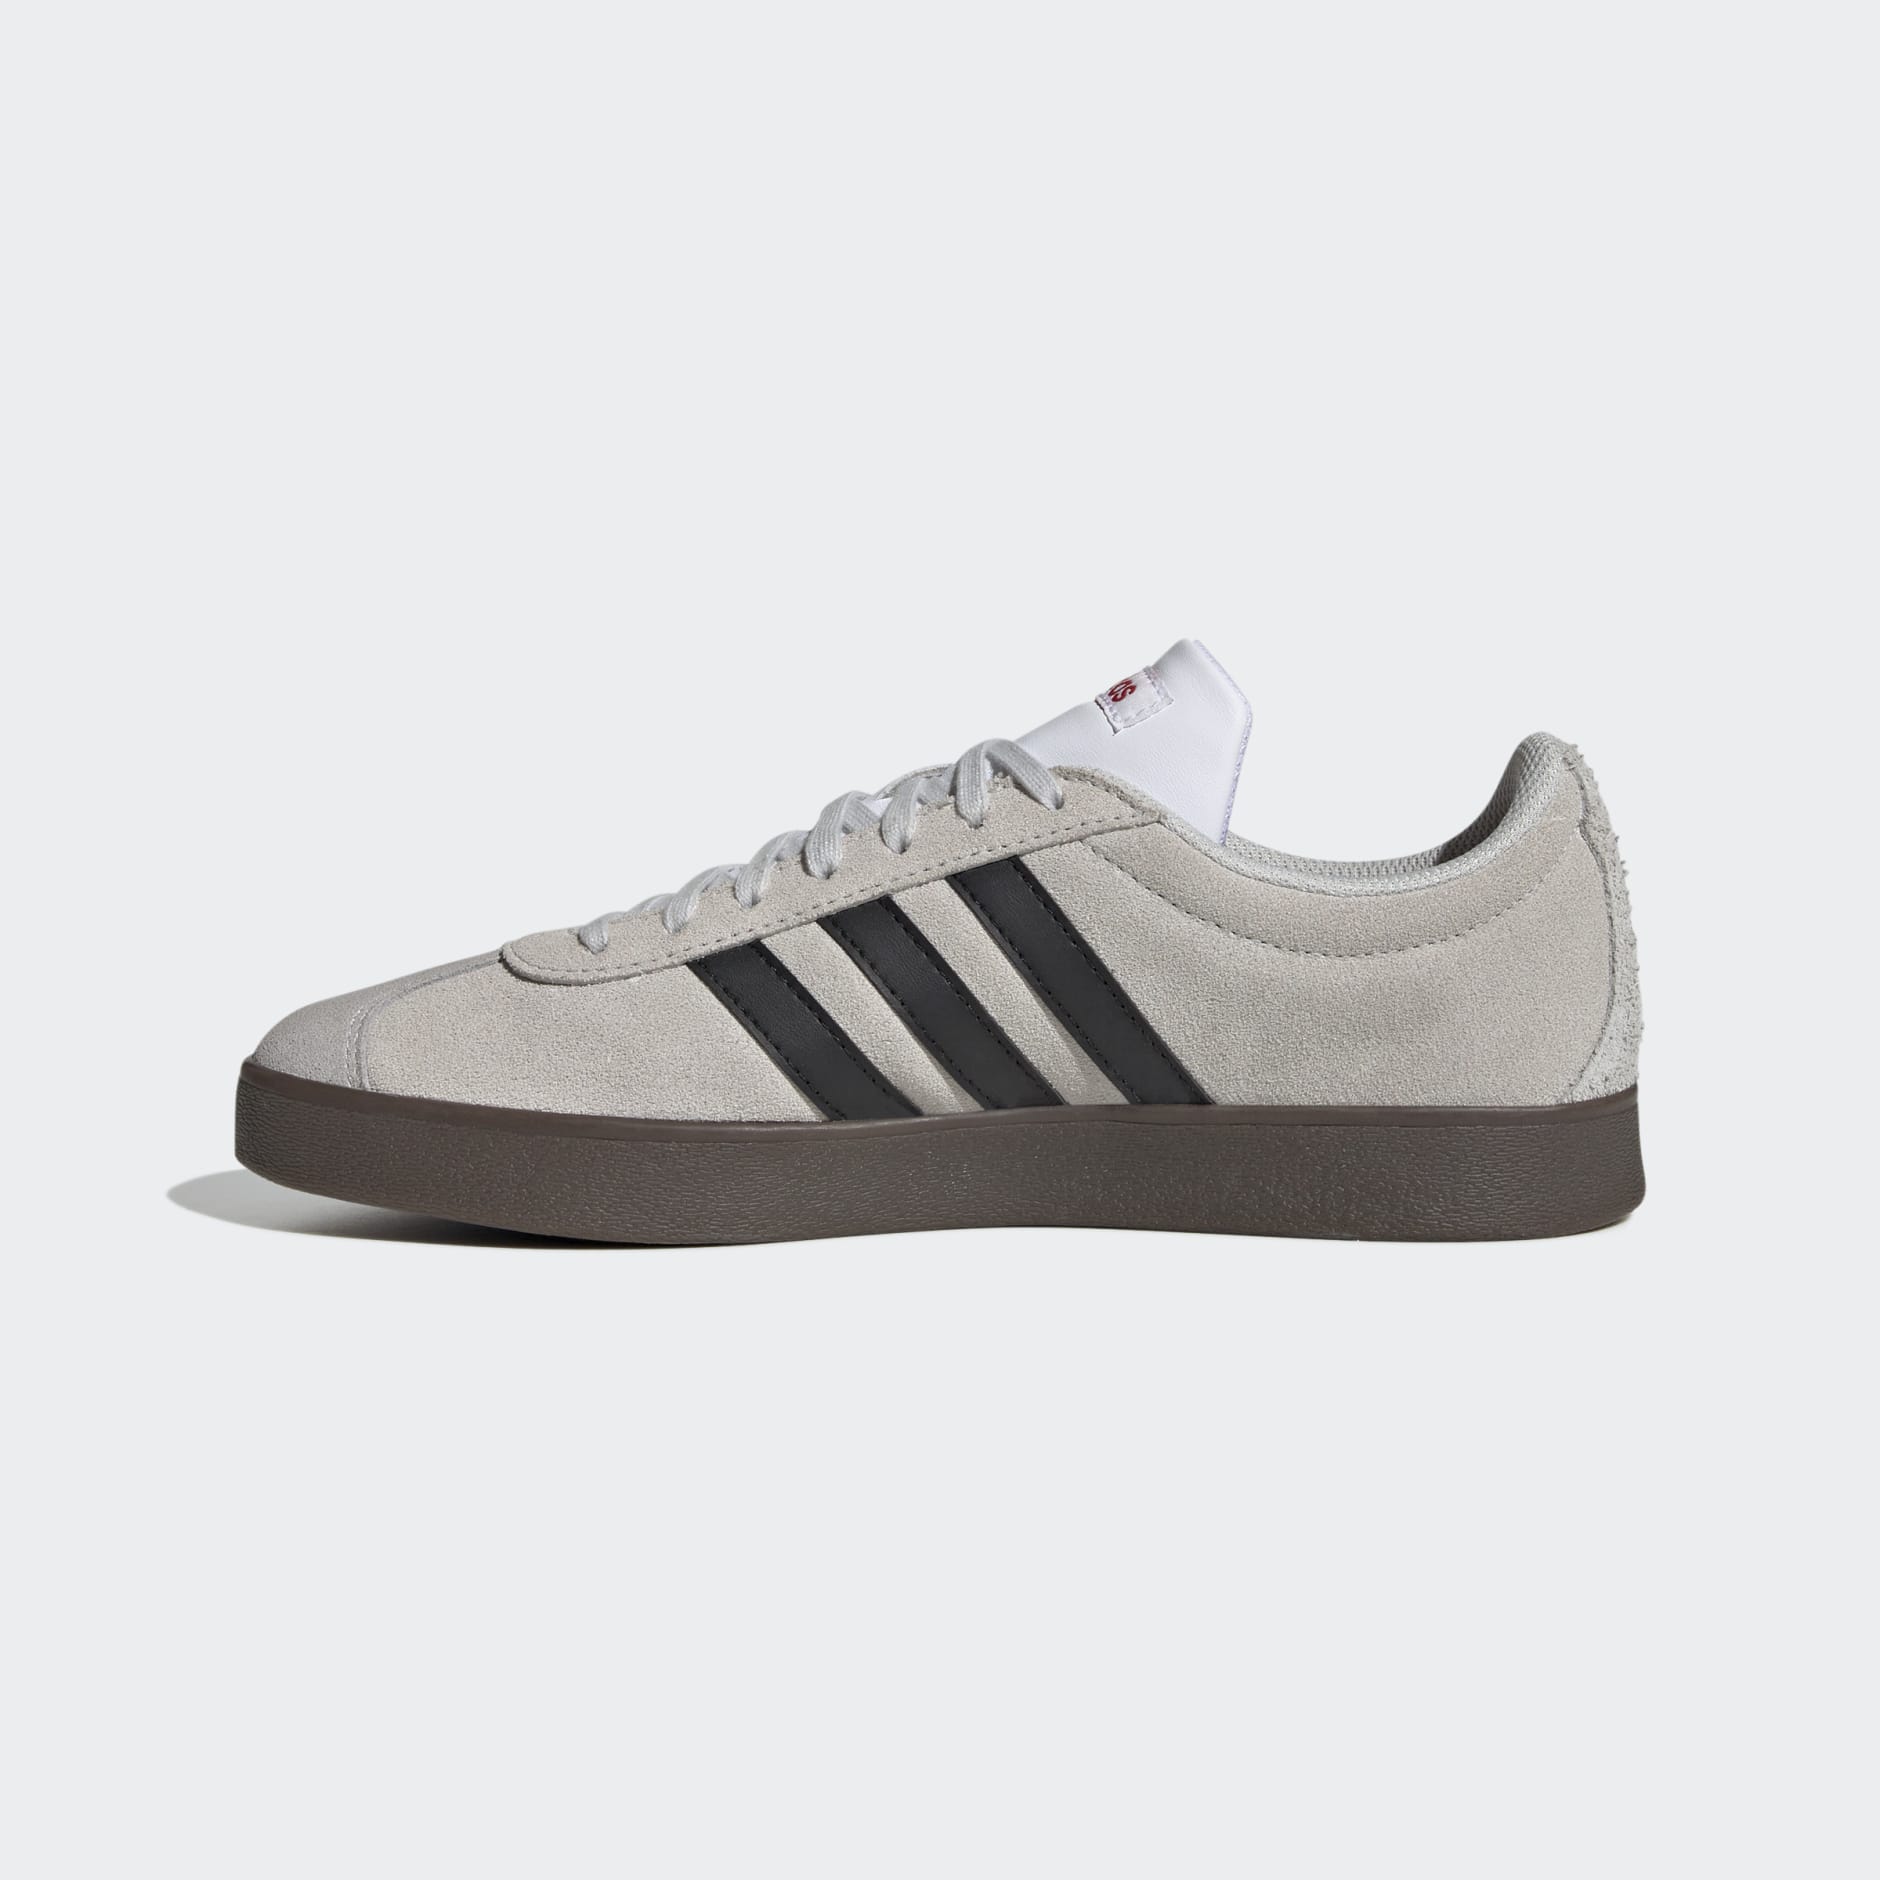 Shoes - VL Court Lifestyle Skateboarding Suede Shoes - Grey | adidas ...